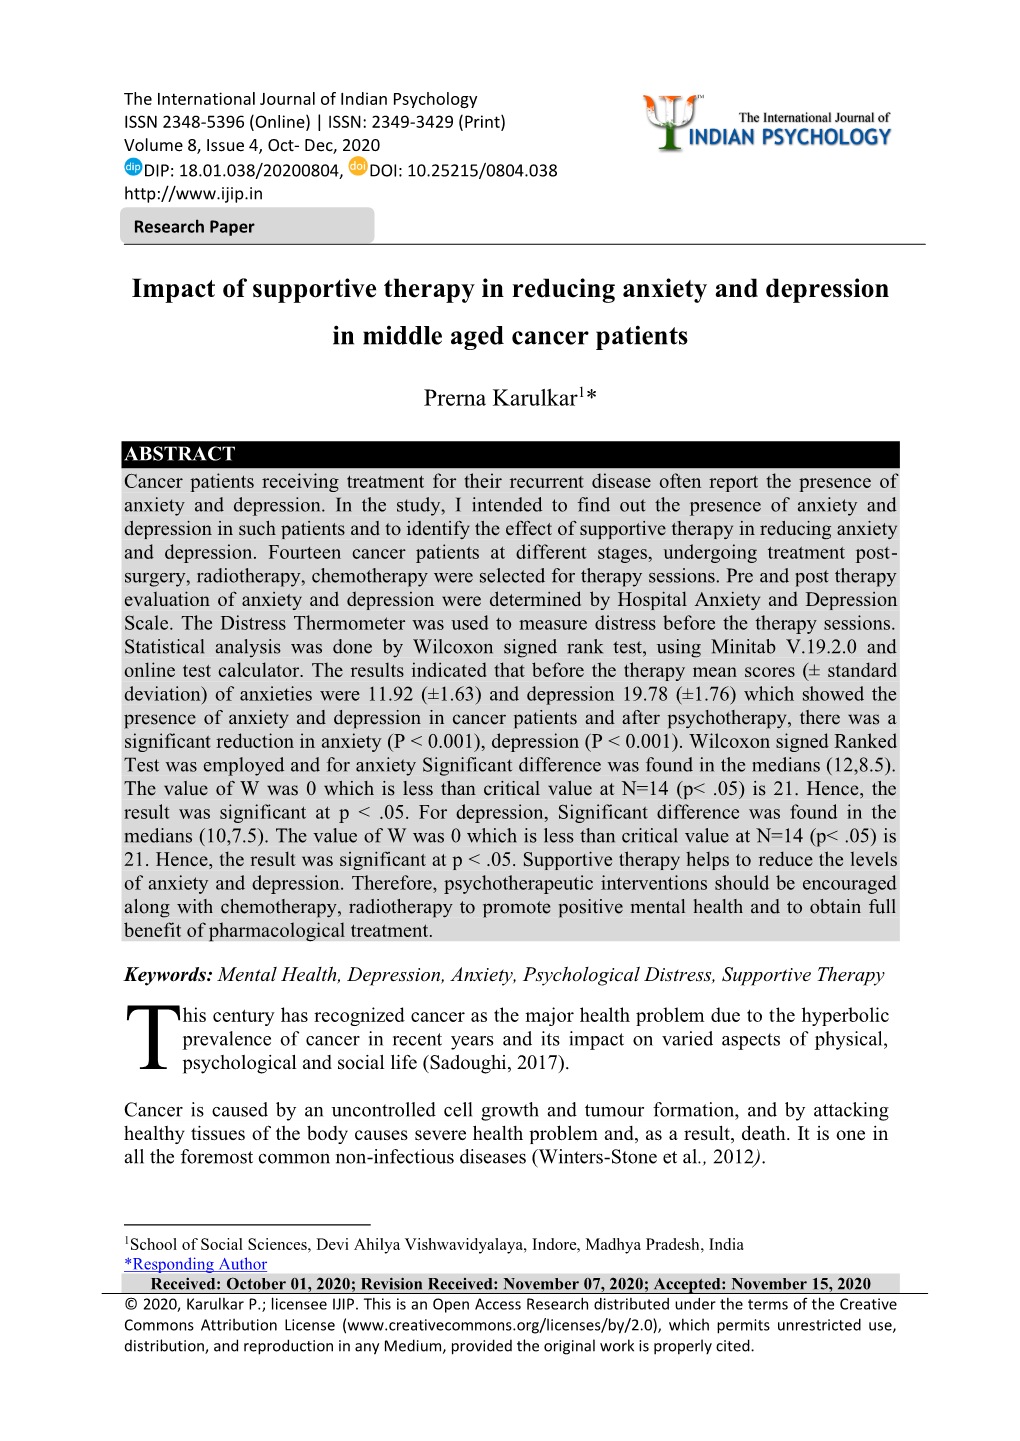 Impact of Supportive Therapy in Reducing Anxiety and Depression in Middle Aged Cancer Patients